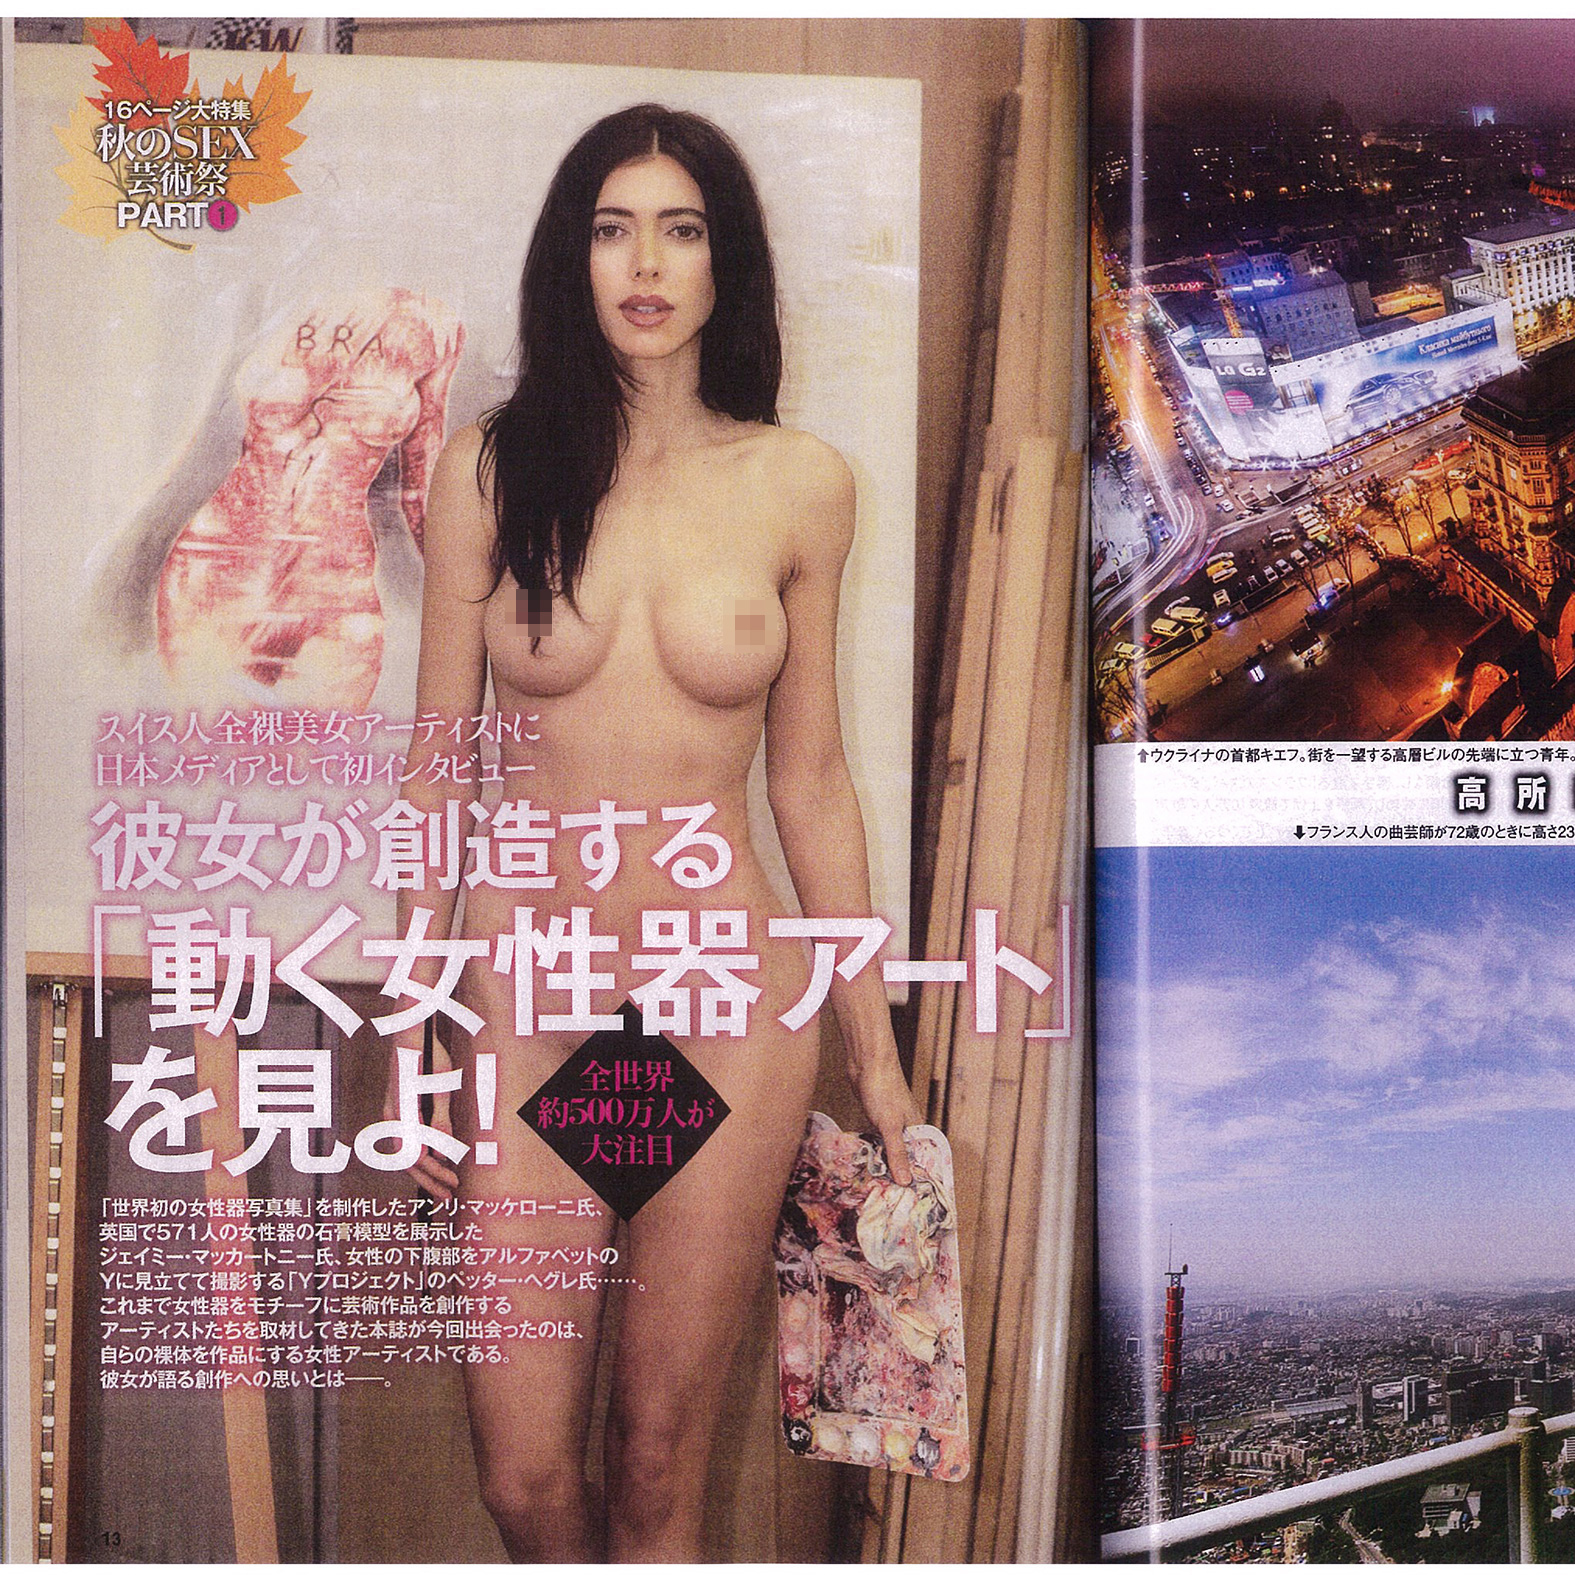 Weekly Post Japan printed Interview censored picture